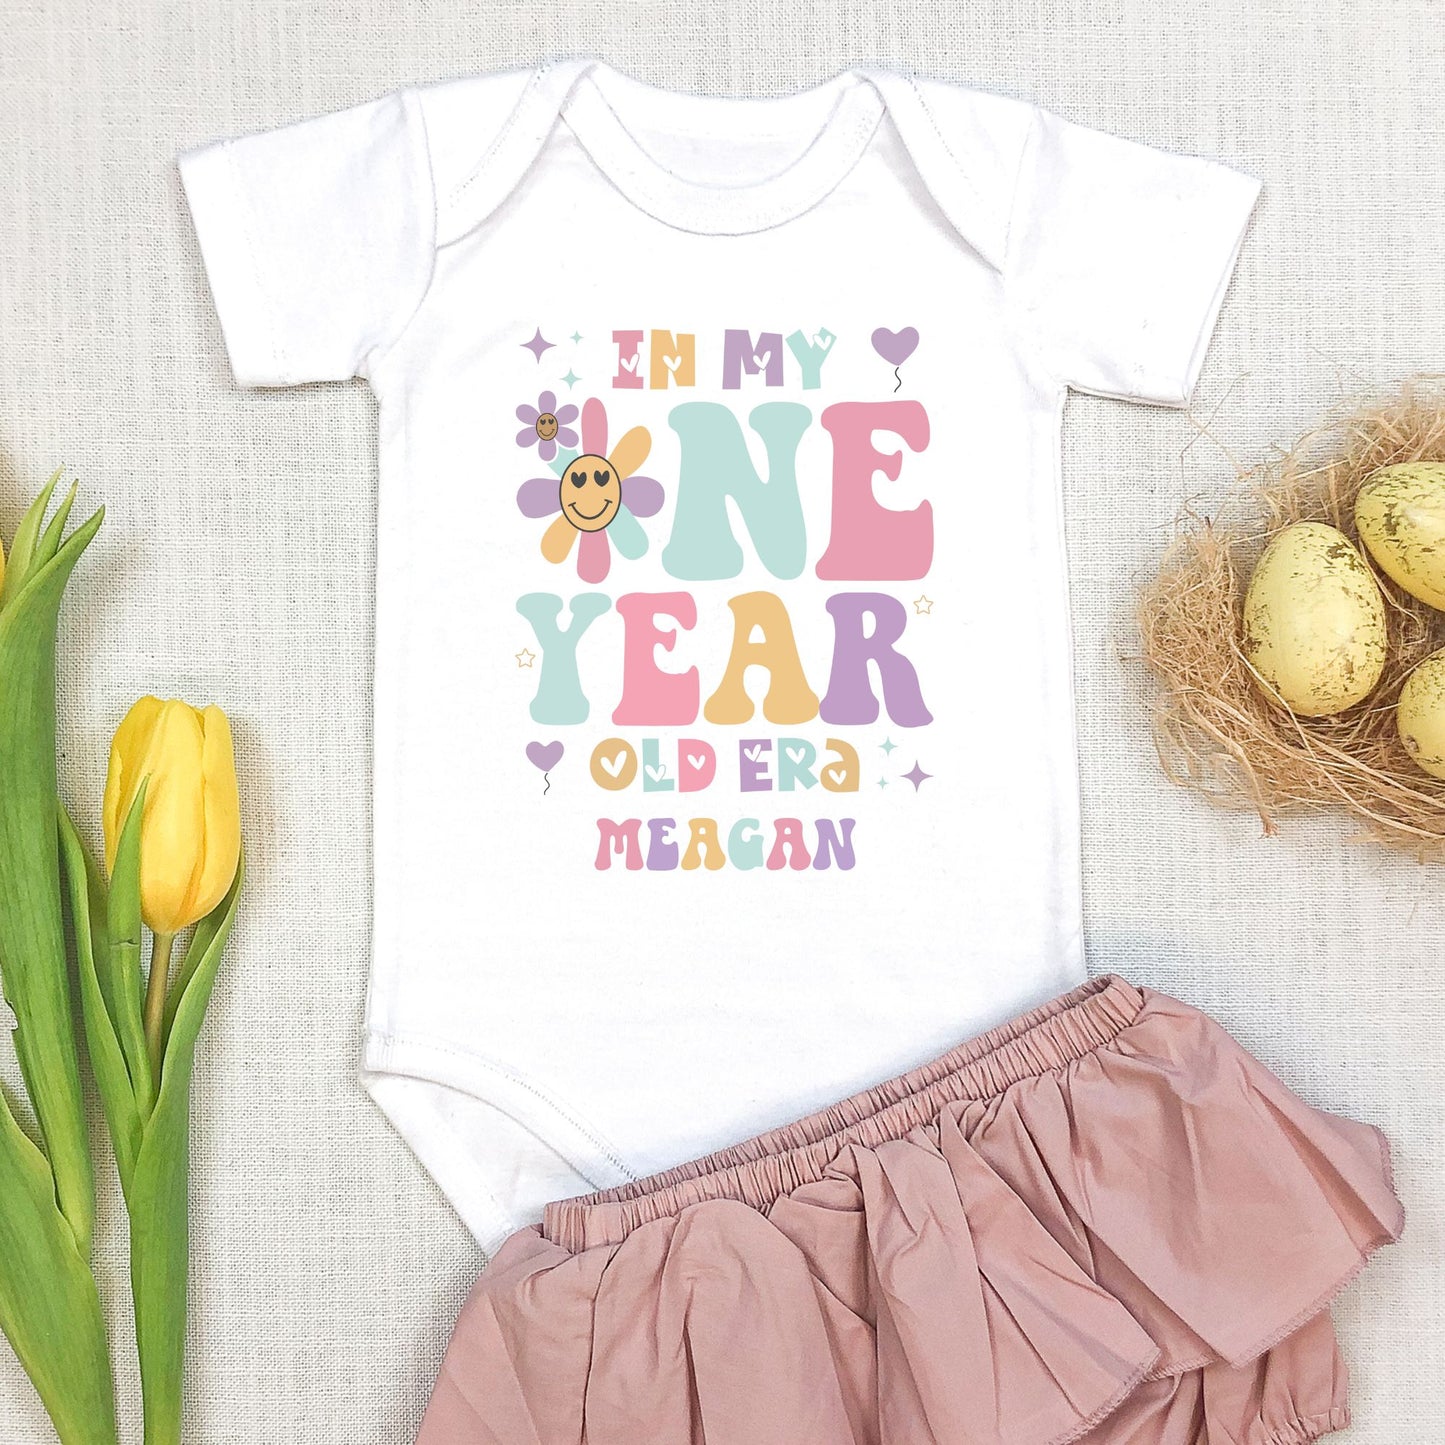 Personalized "My One-Year-Old Era" Baby Romper